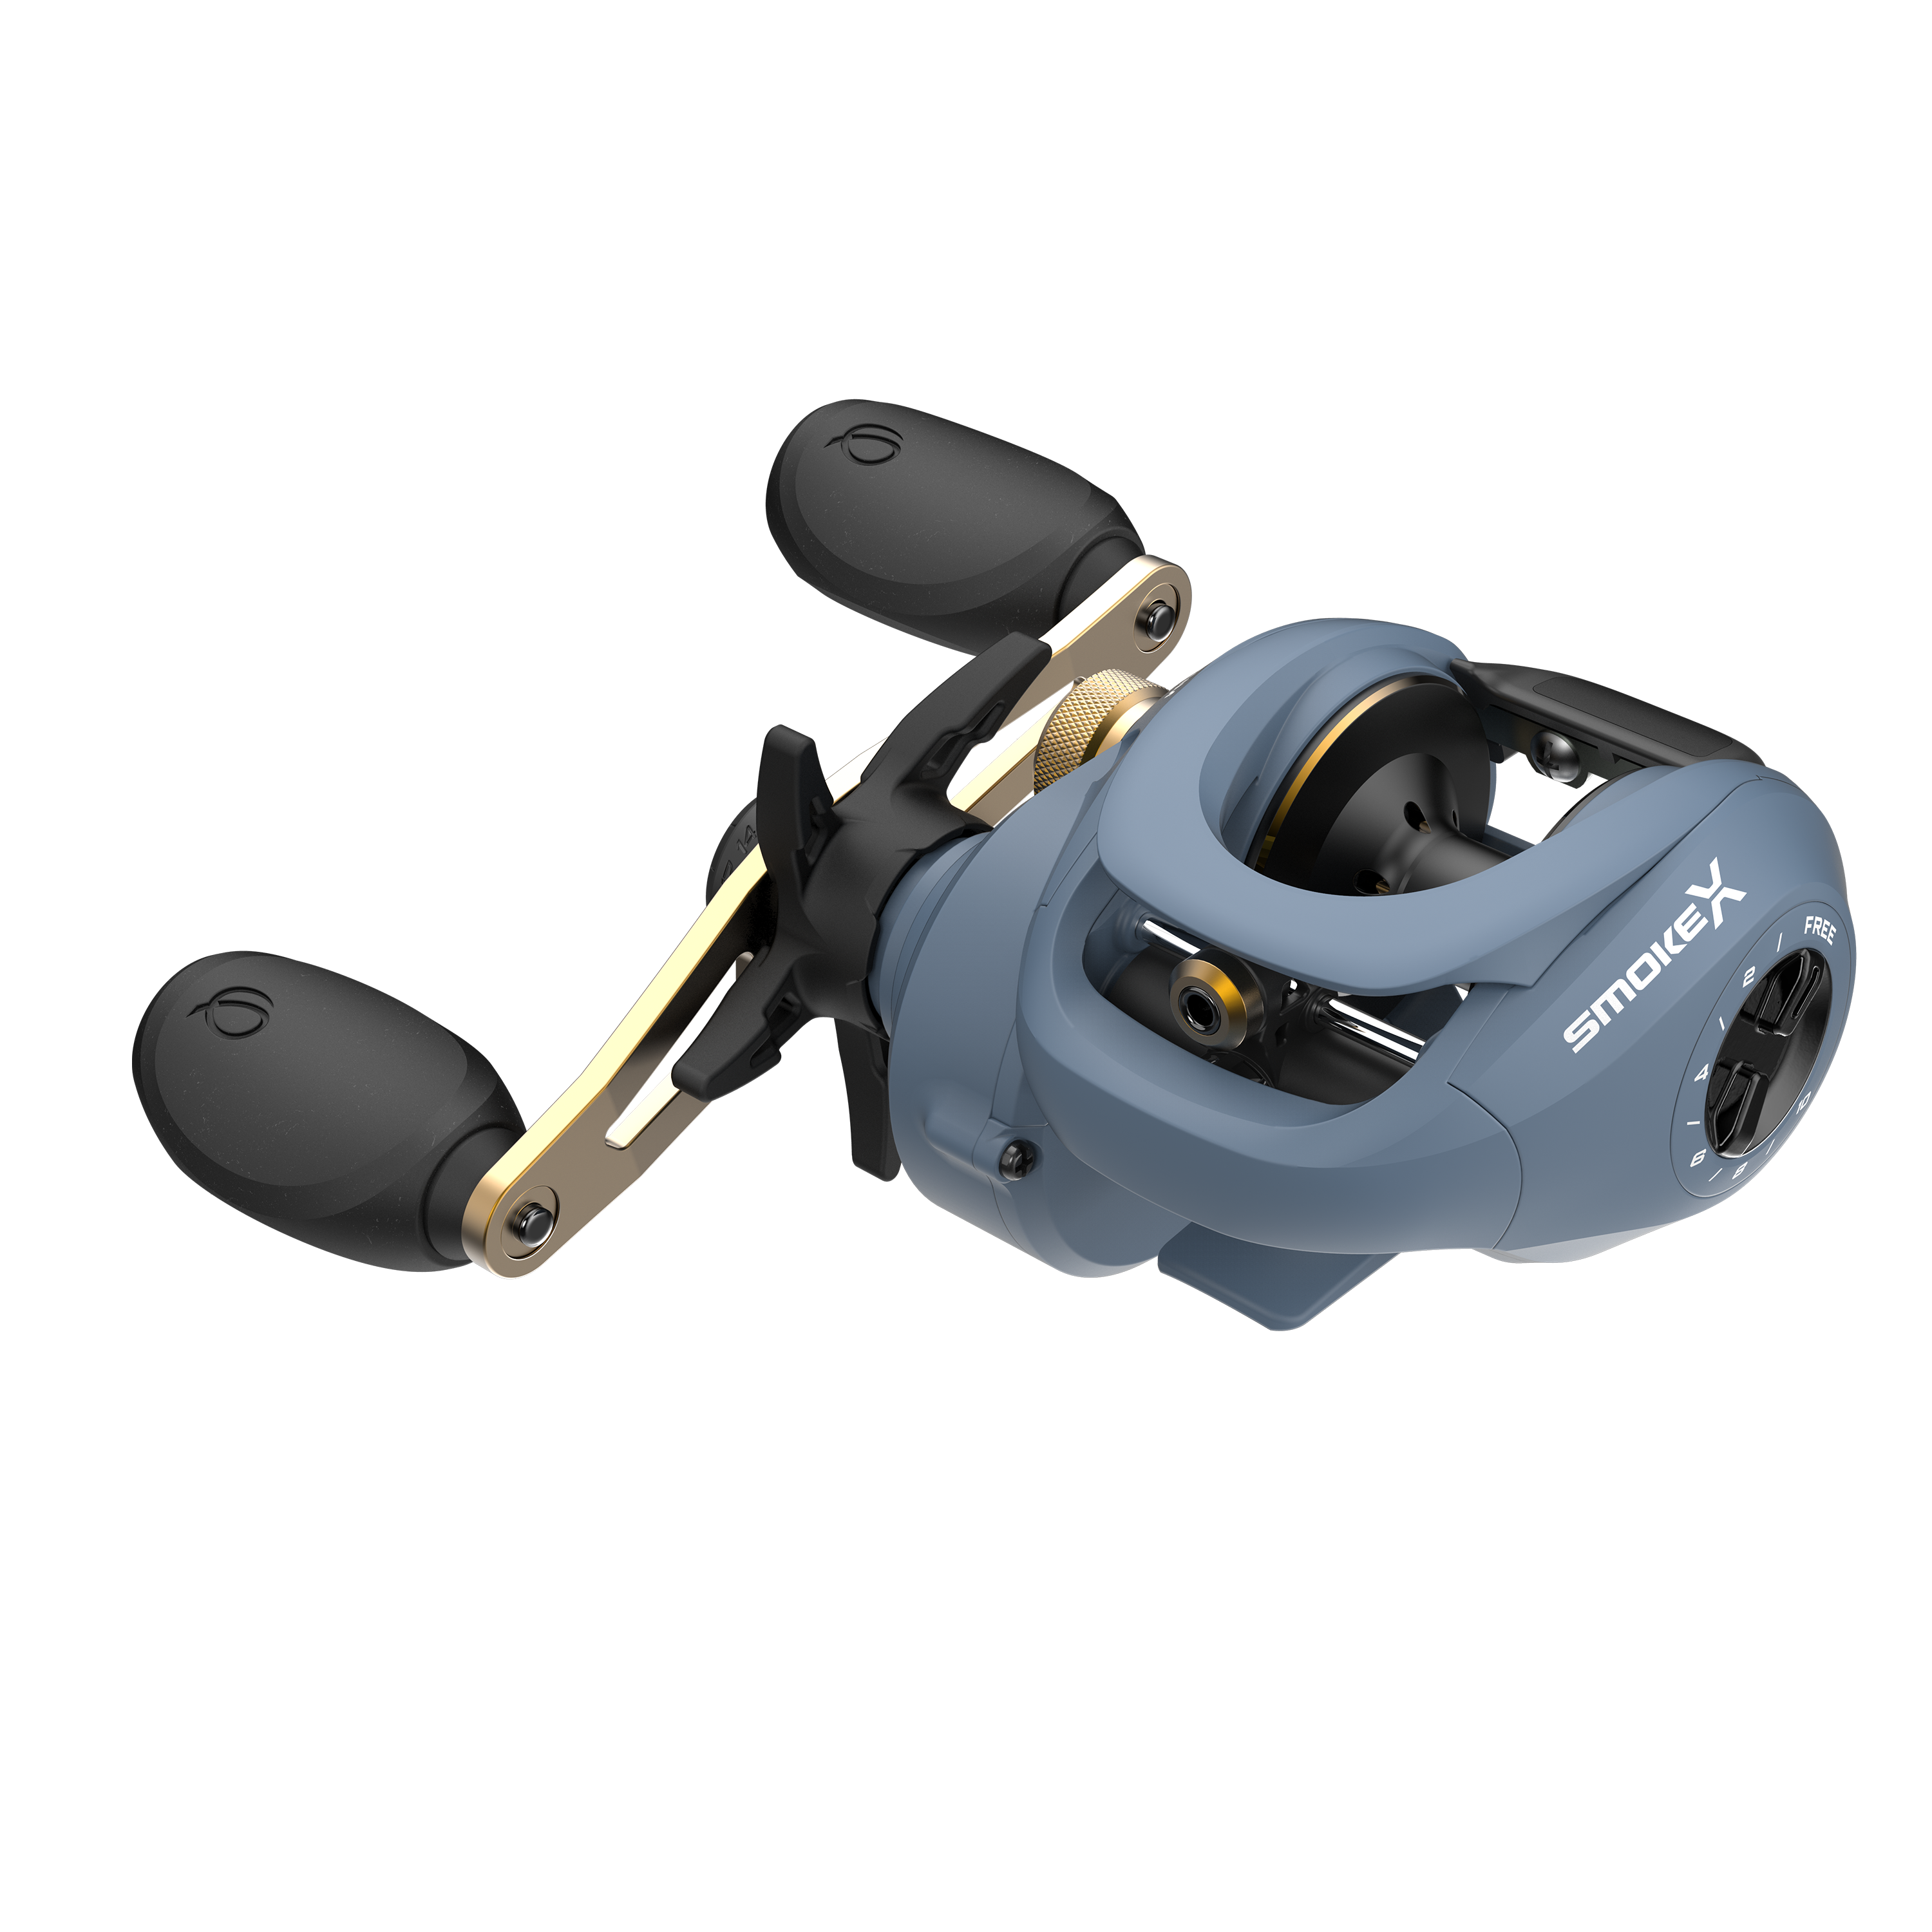 Quantum Smoke Baitcast Reel  Up to 24% Off w/ Free Shipping and Handling